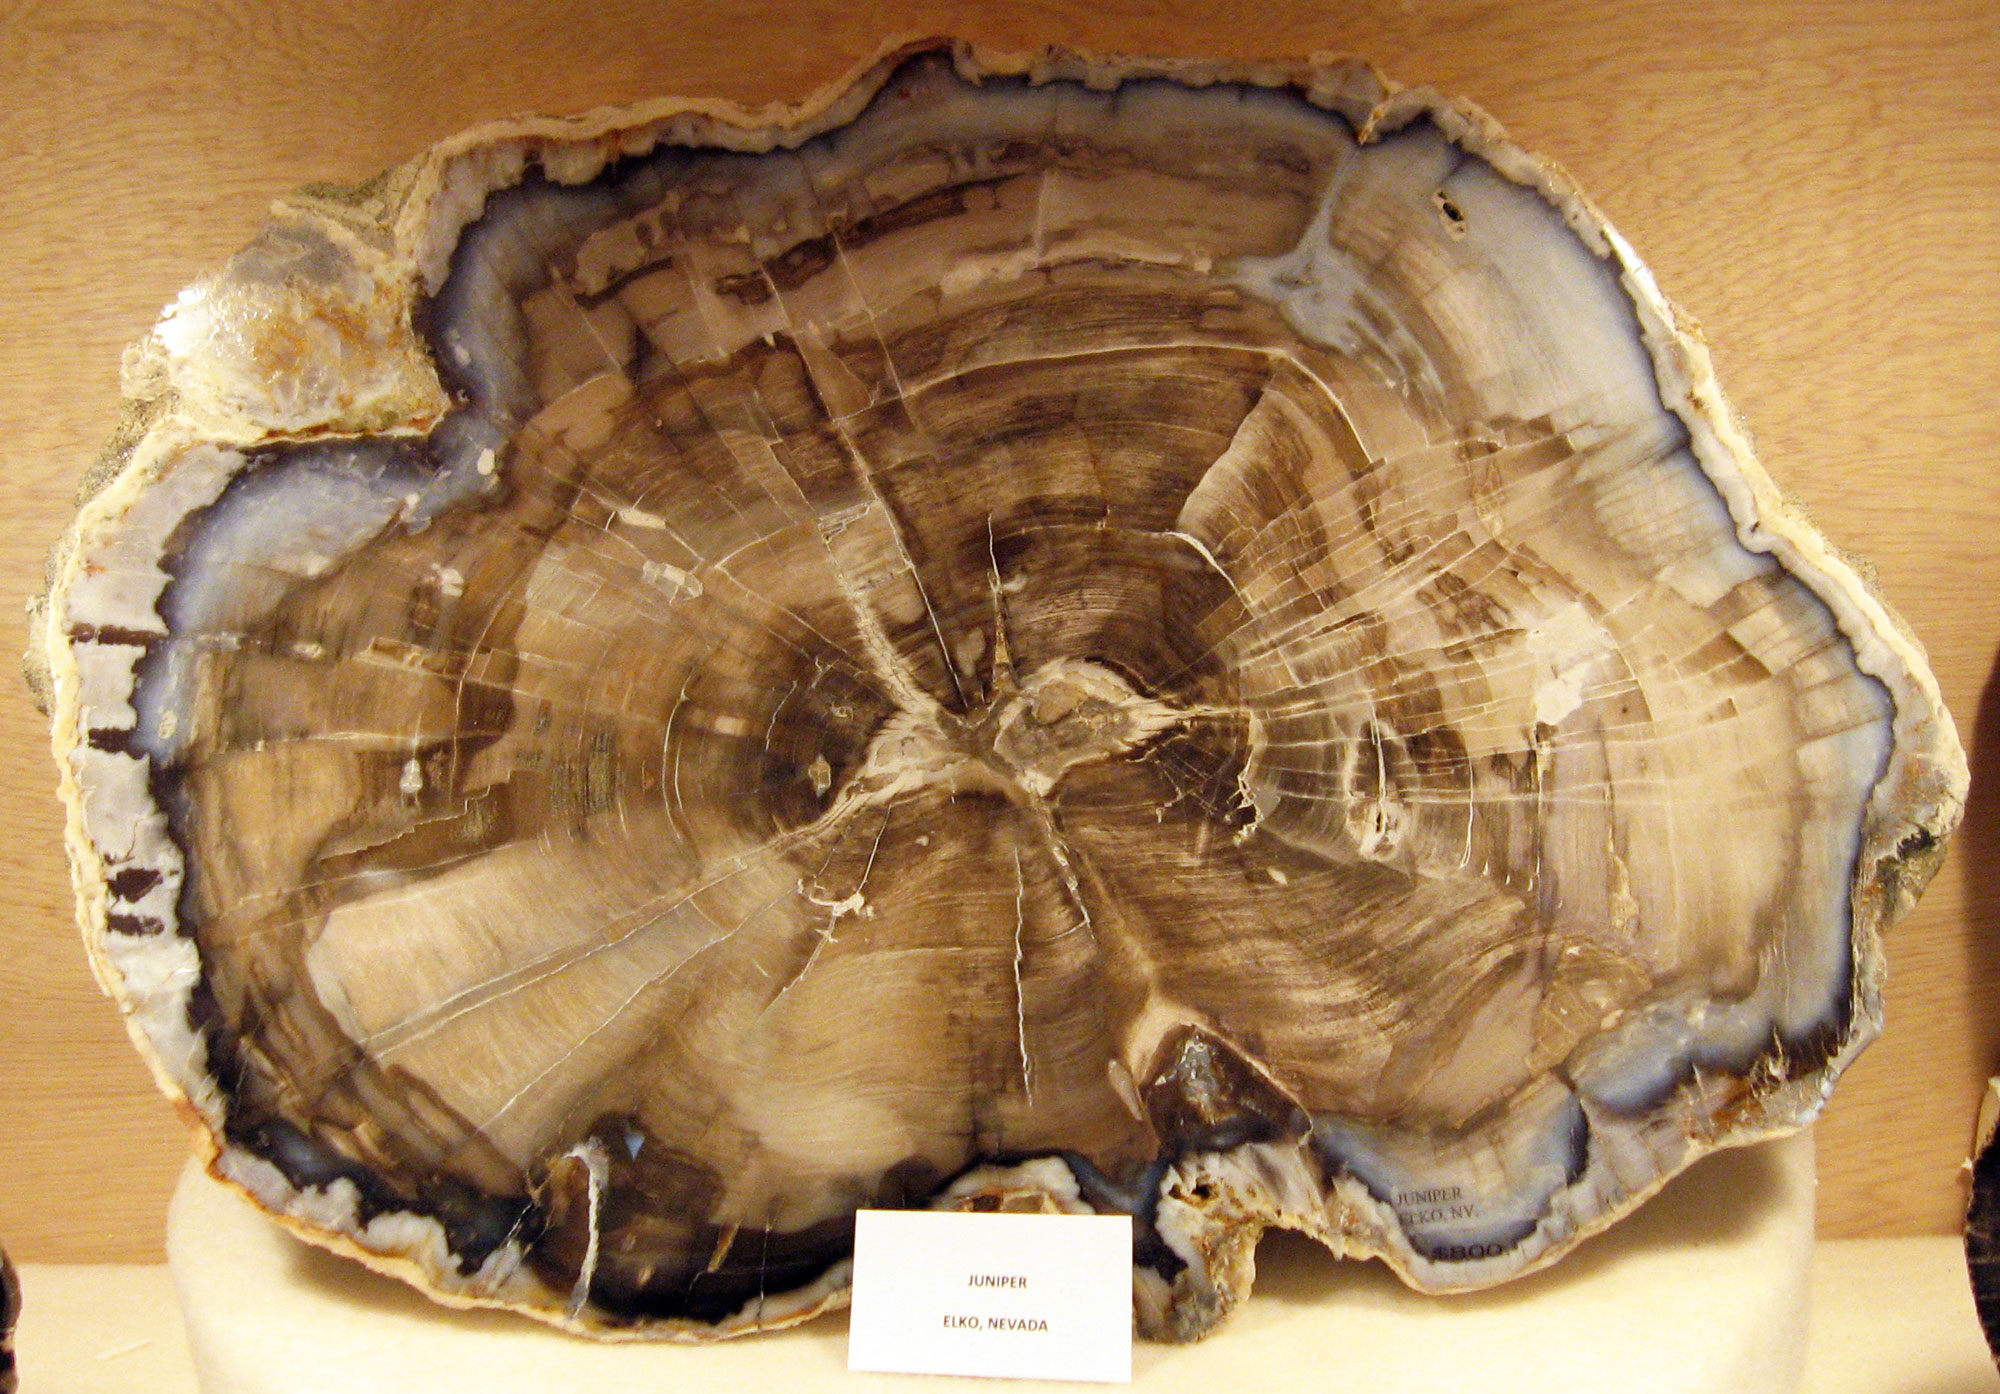 Photograph of a cut and polished section of petrified juniper wood from the Oligocene of Nevada.